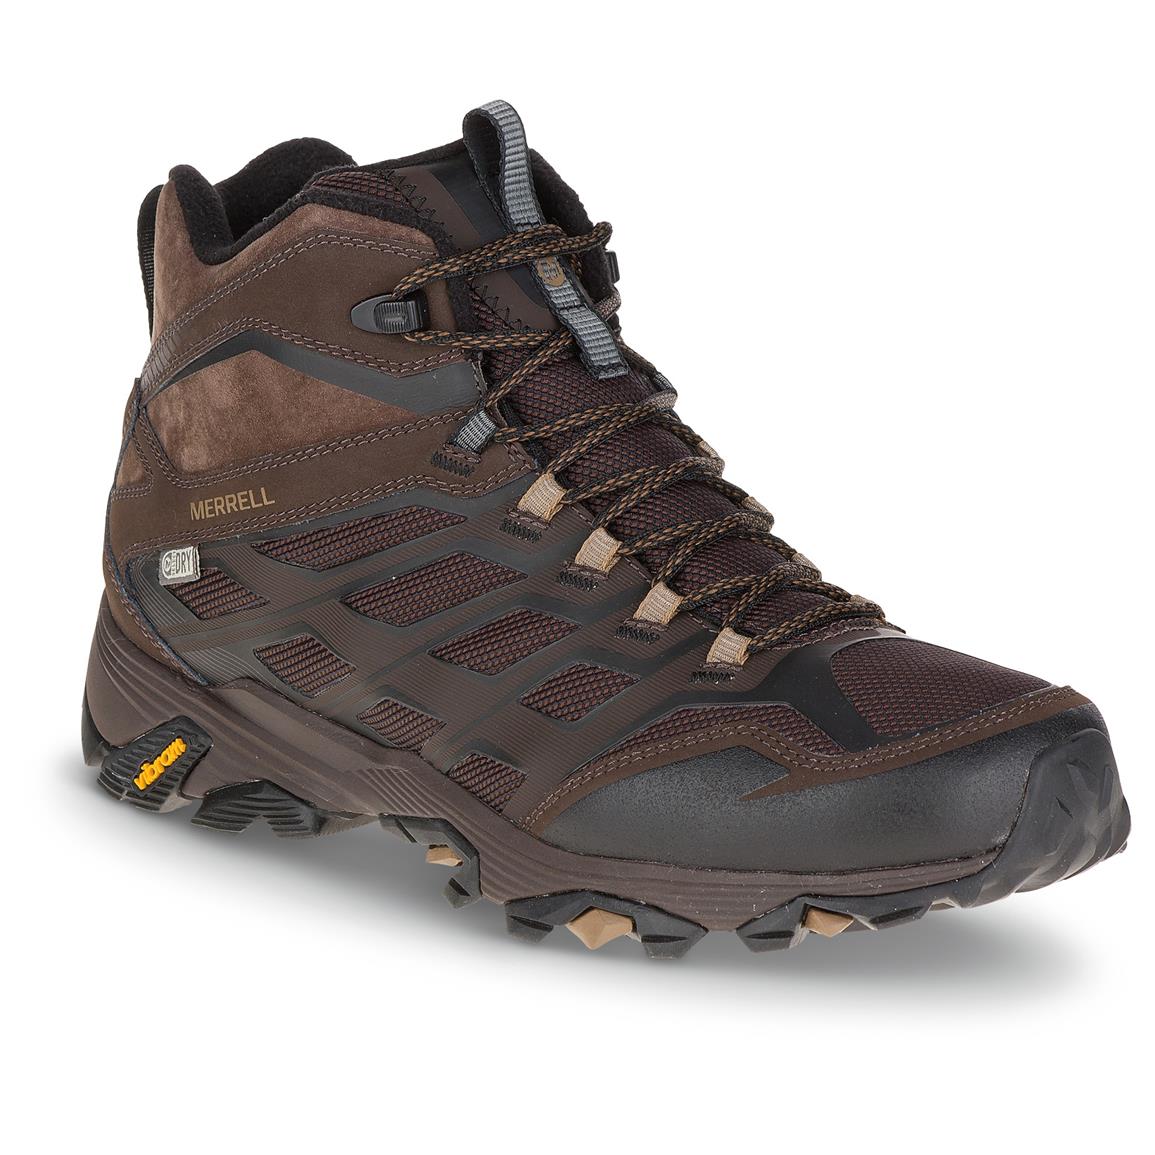 Merrell Men's Moab FST Ice+ Thermo Hiking Boots - 665552, Hiking Boots & Shoes at Sportsman's Guide